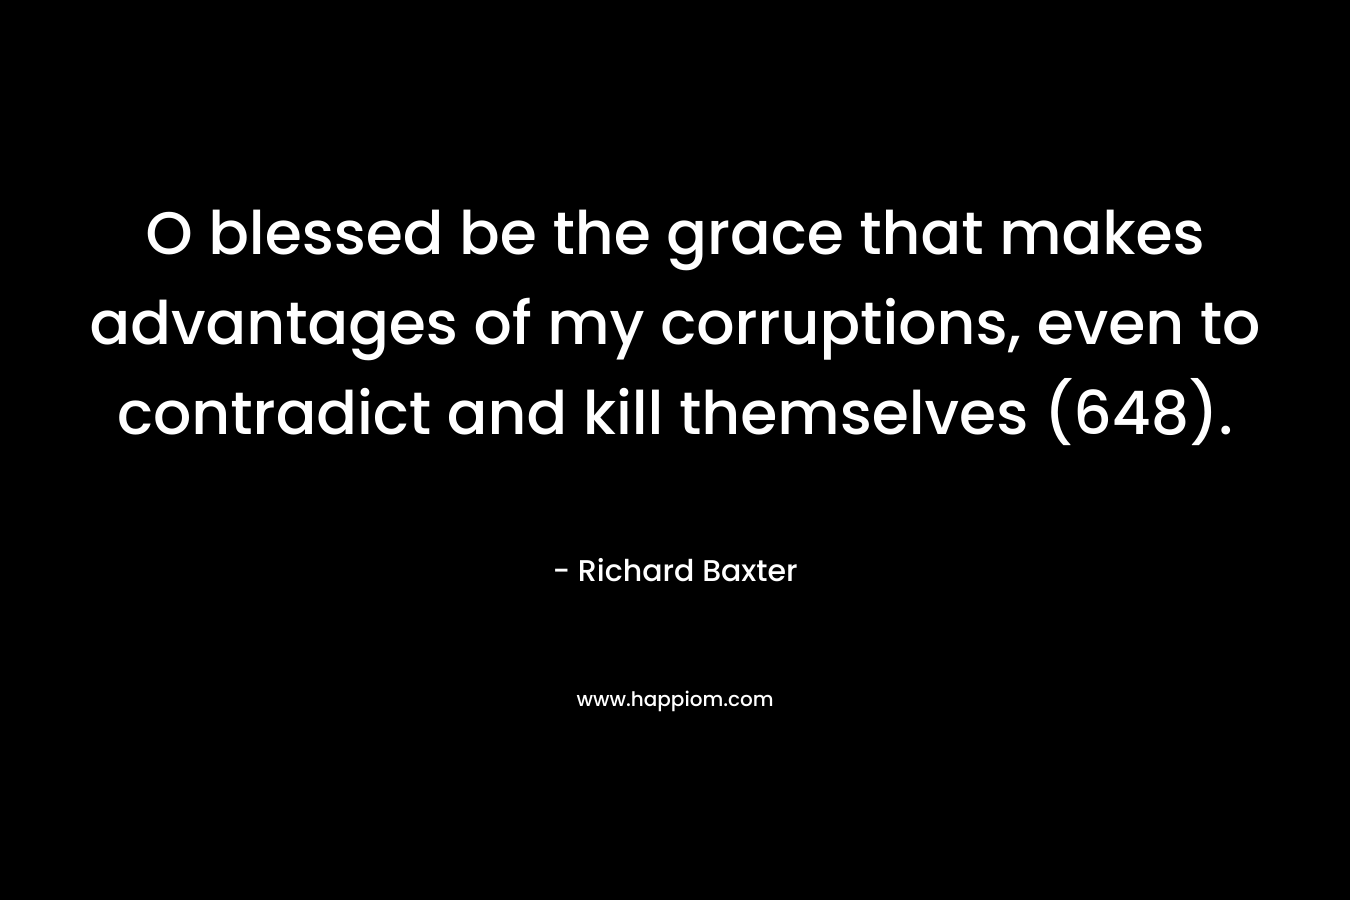 O blessed be the grace that makes advantages of my corruptions, even to contradict and kill themselves (648). – Richard Baxter